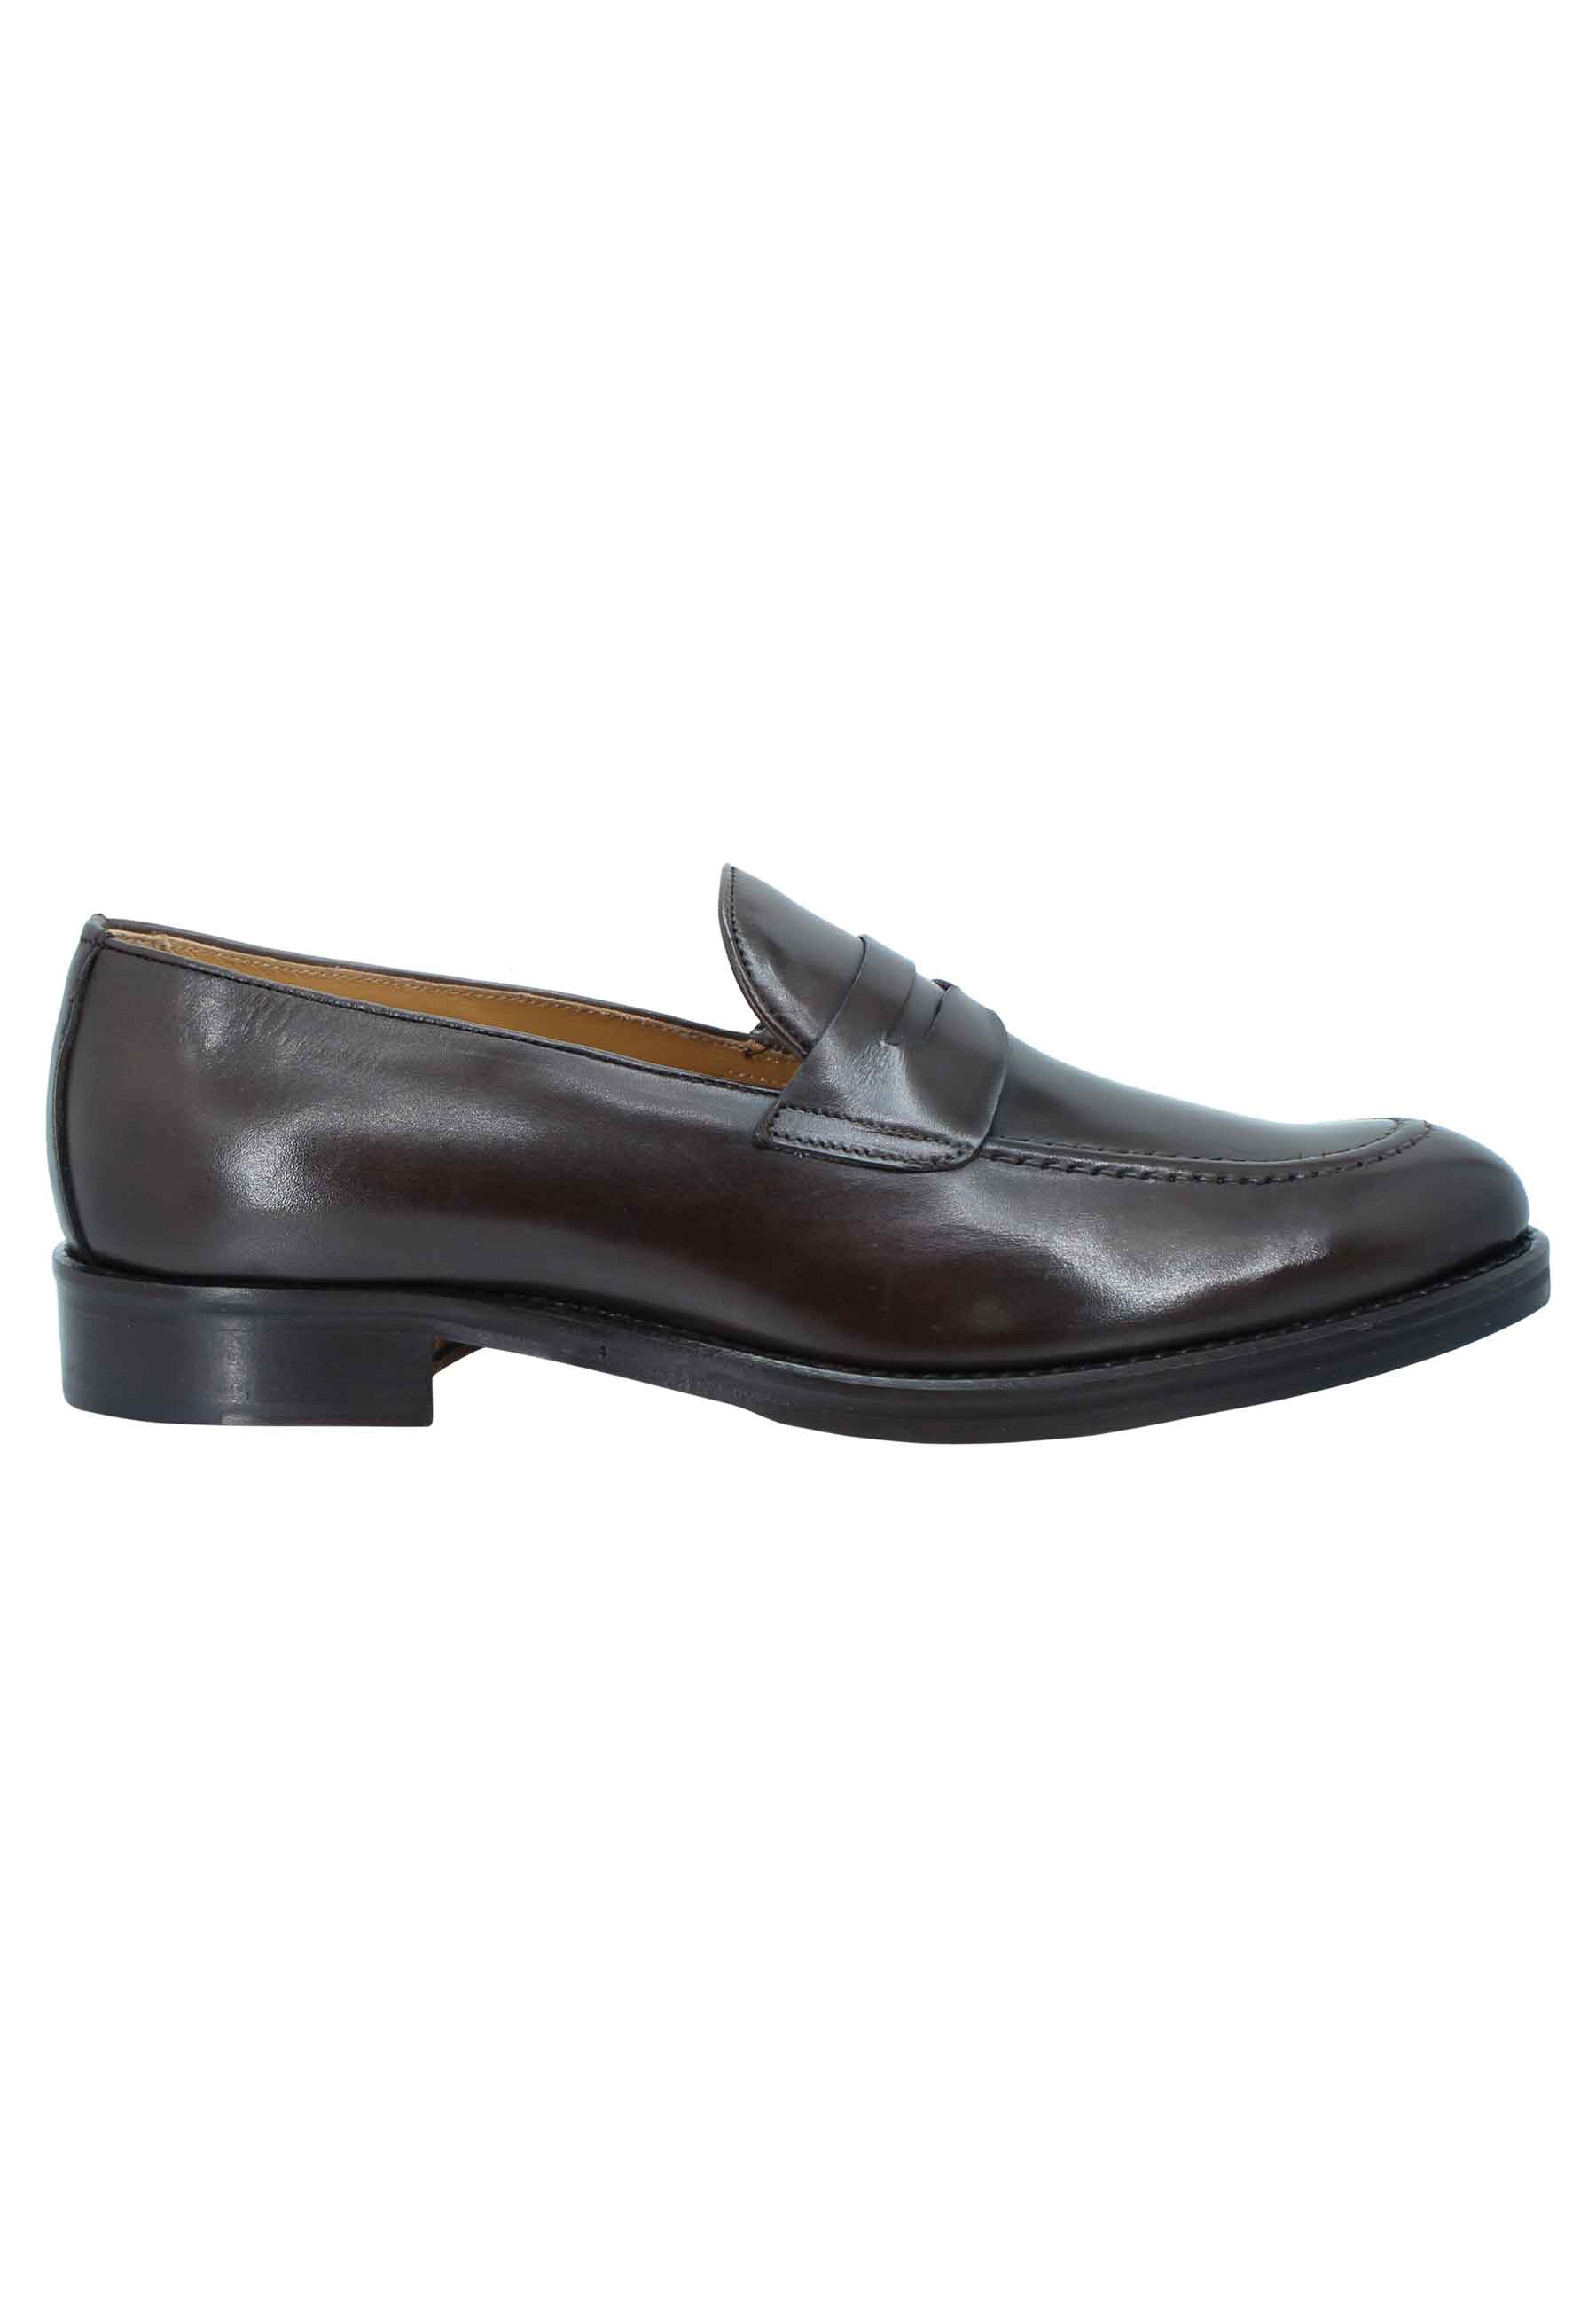 Men's moccasins in dark brown leather with tapered toe and leather sole